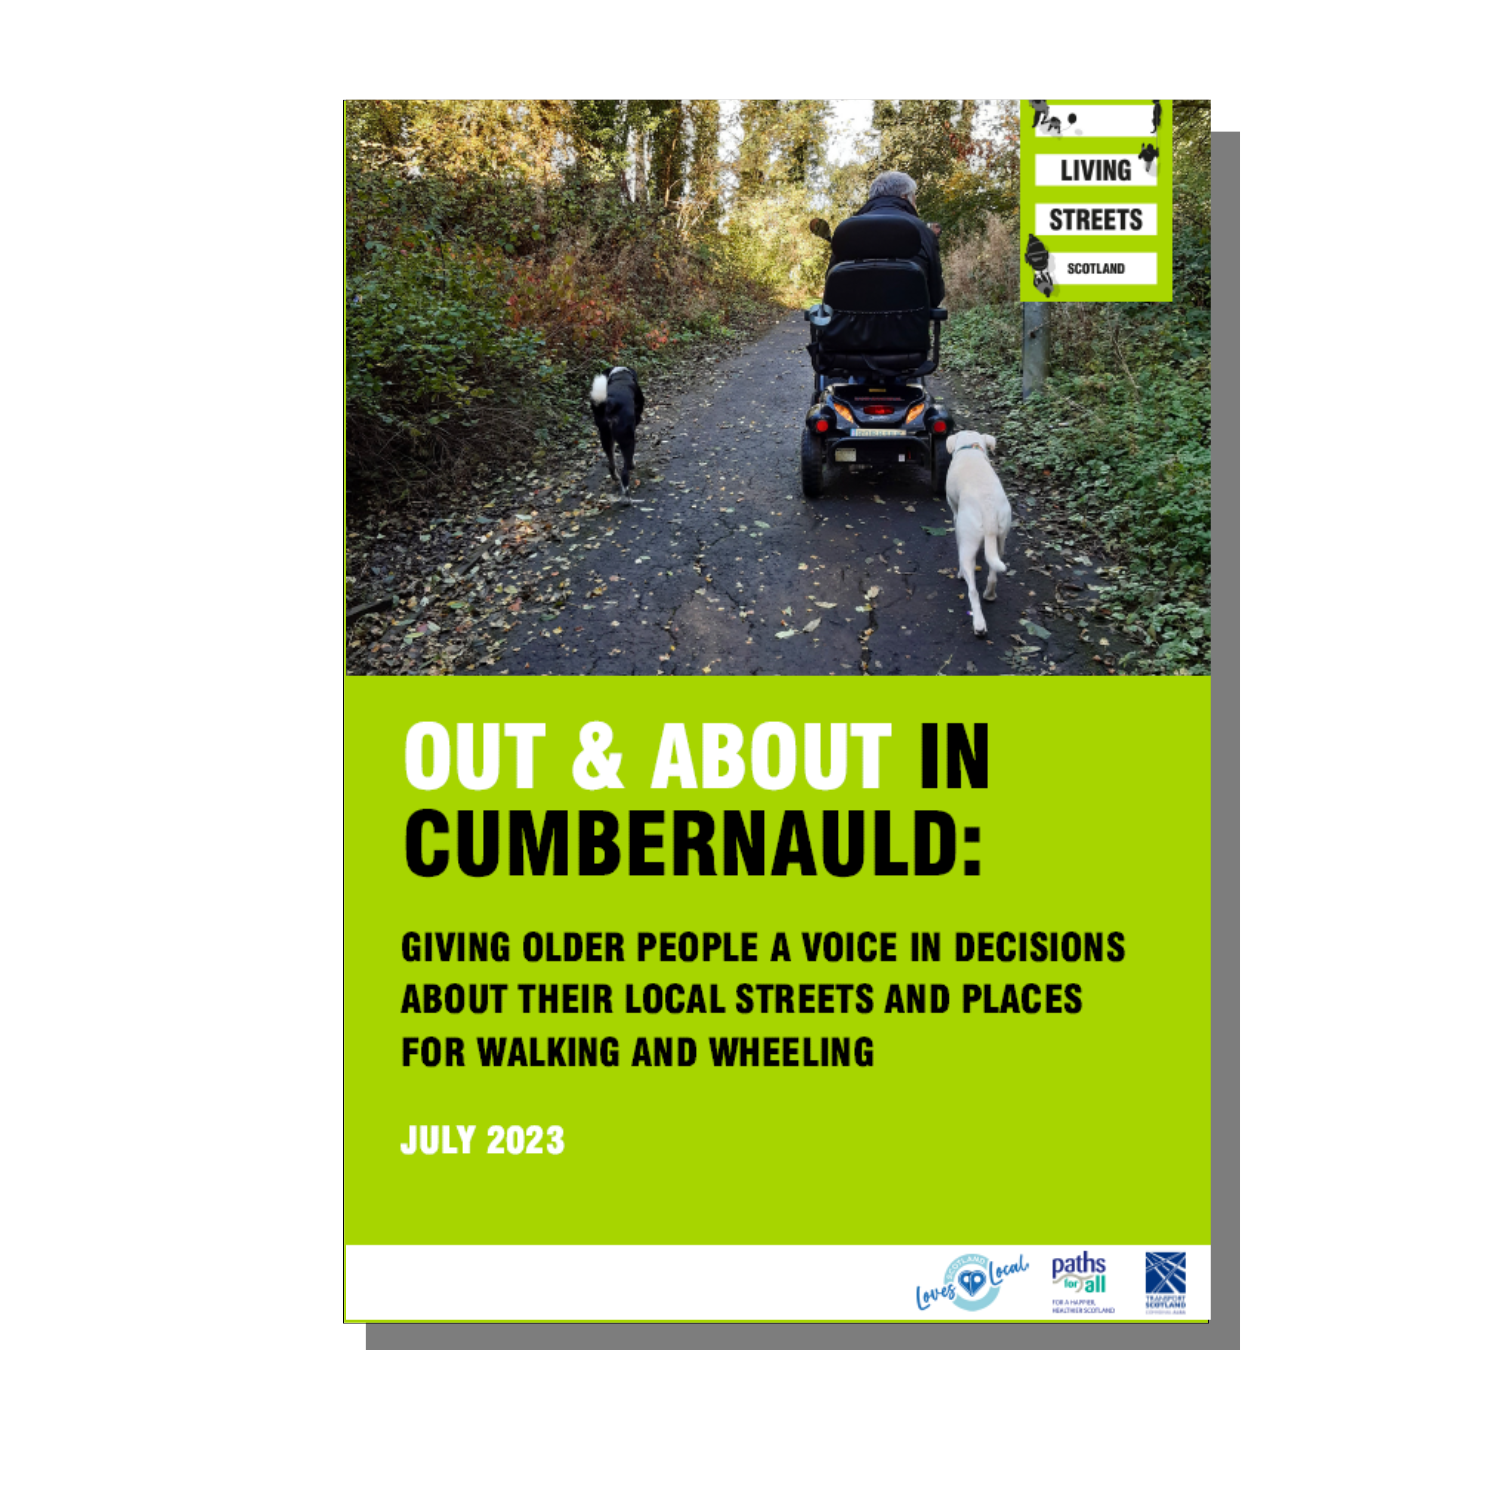 cover of report: a man on an accessibility chair with two dogs wheels along a path